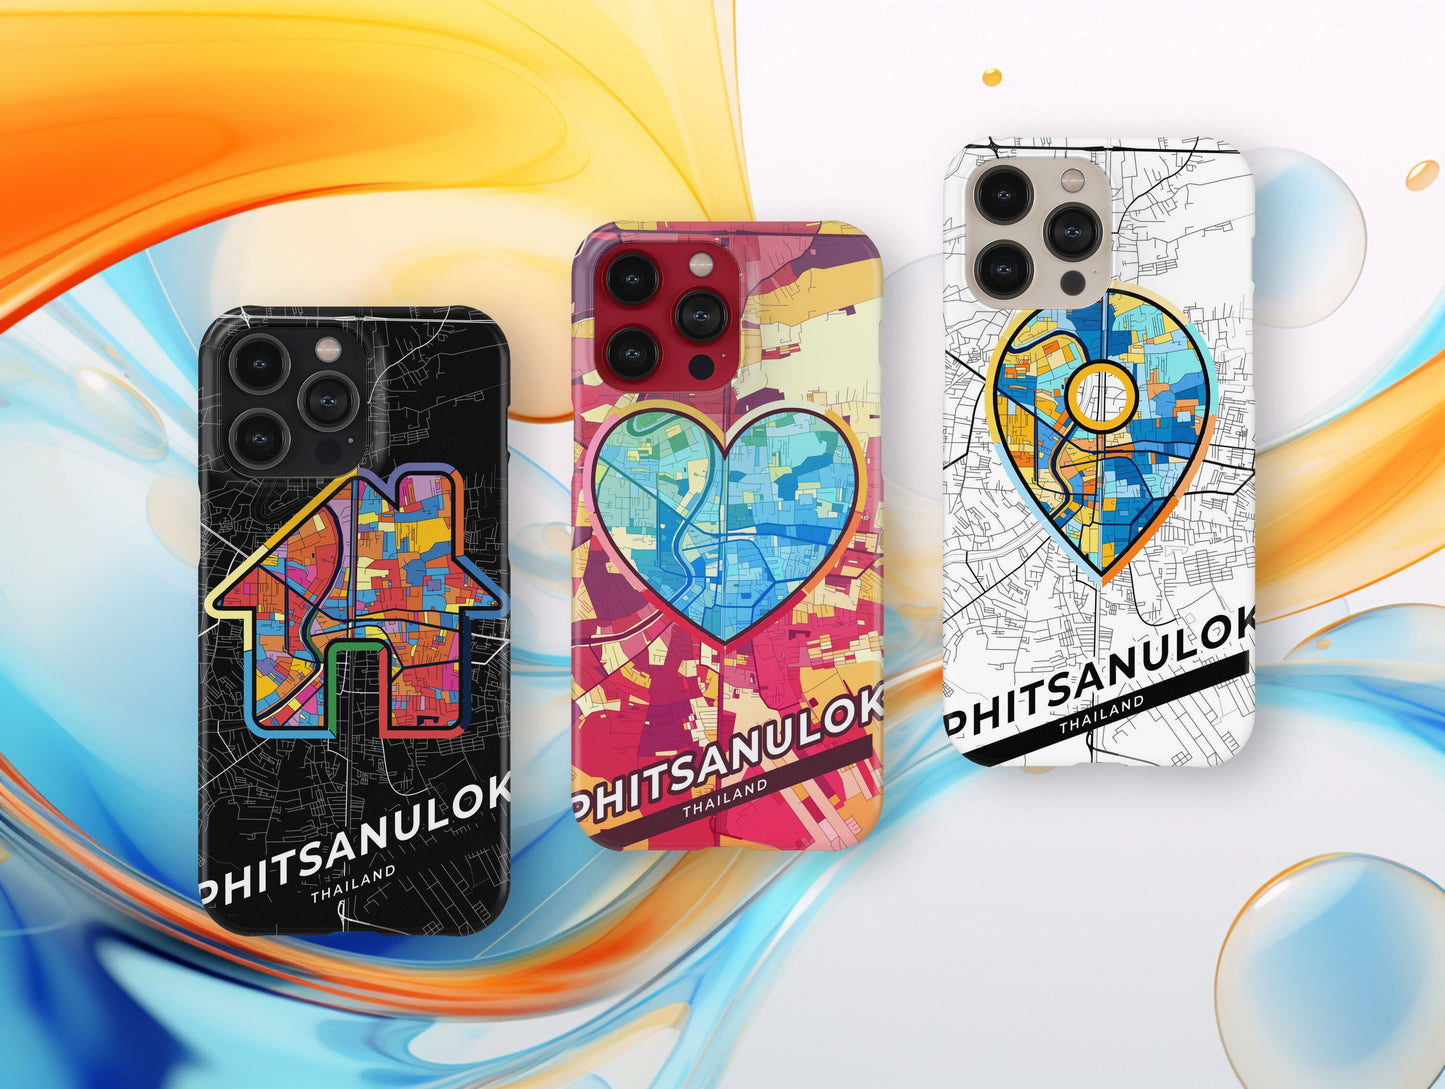 Phitsanulok Thailand slim phone case with colorful icon